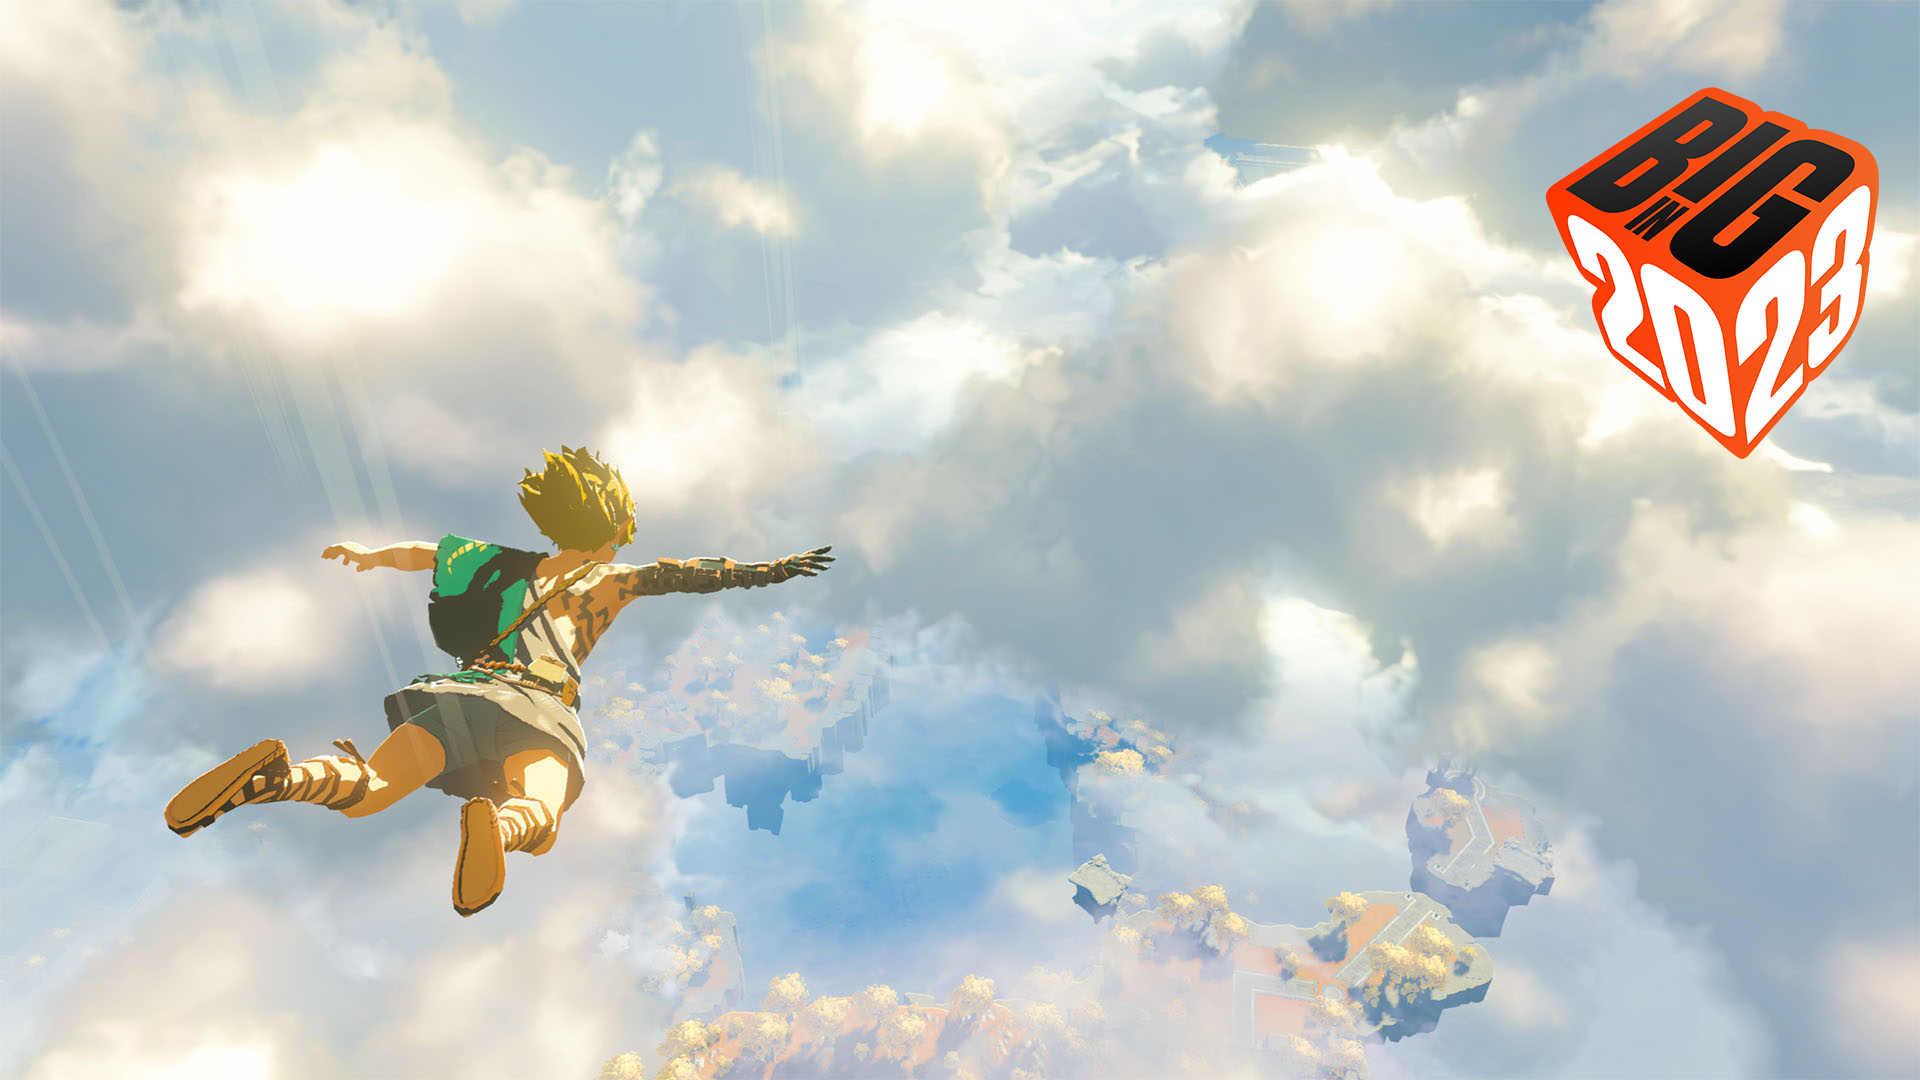 Legend of Zelda: Tears of the Kingdom aims for new heights by taking us to the skies